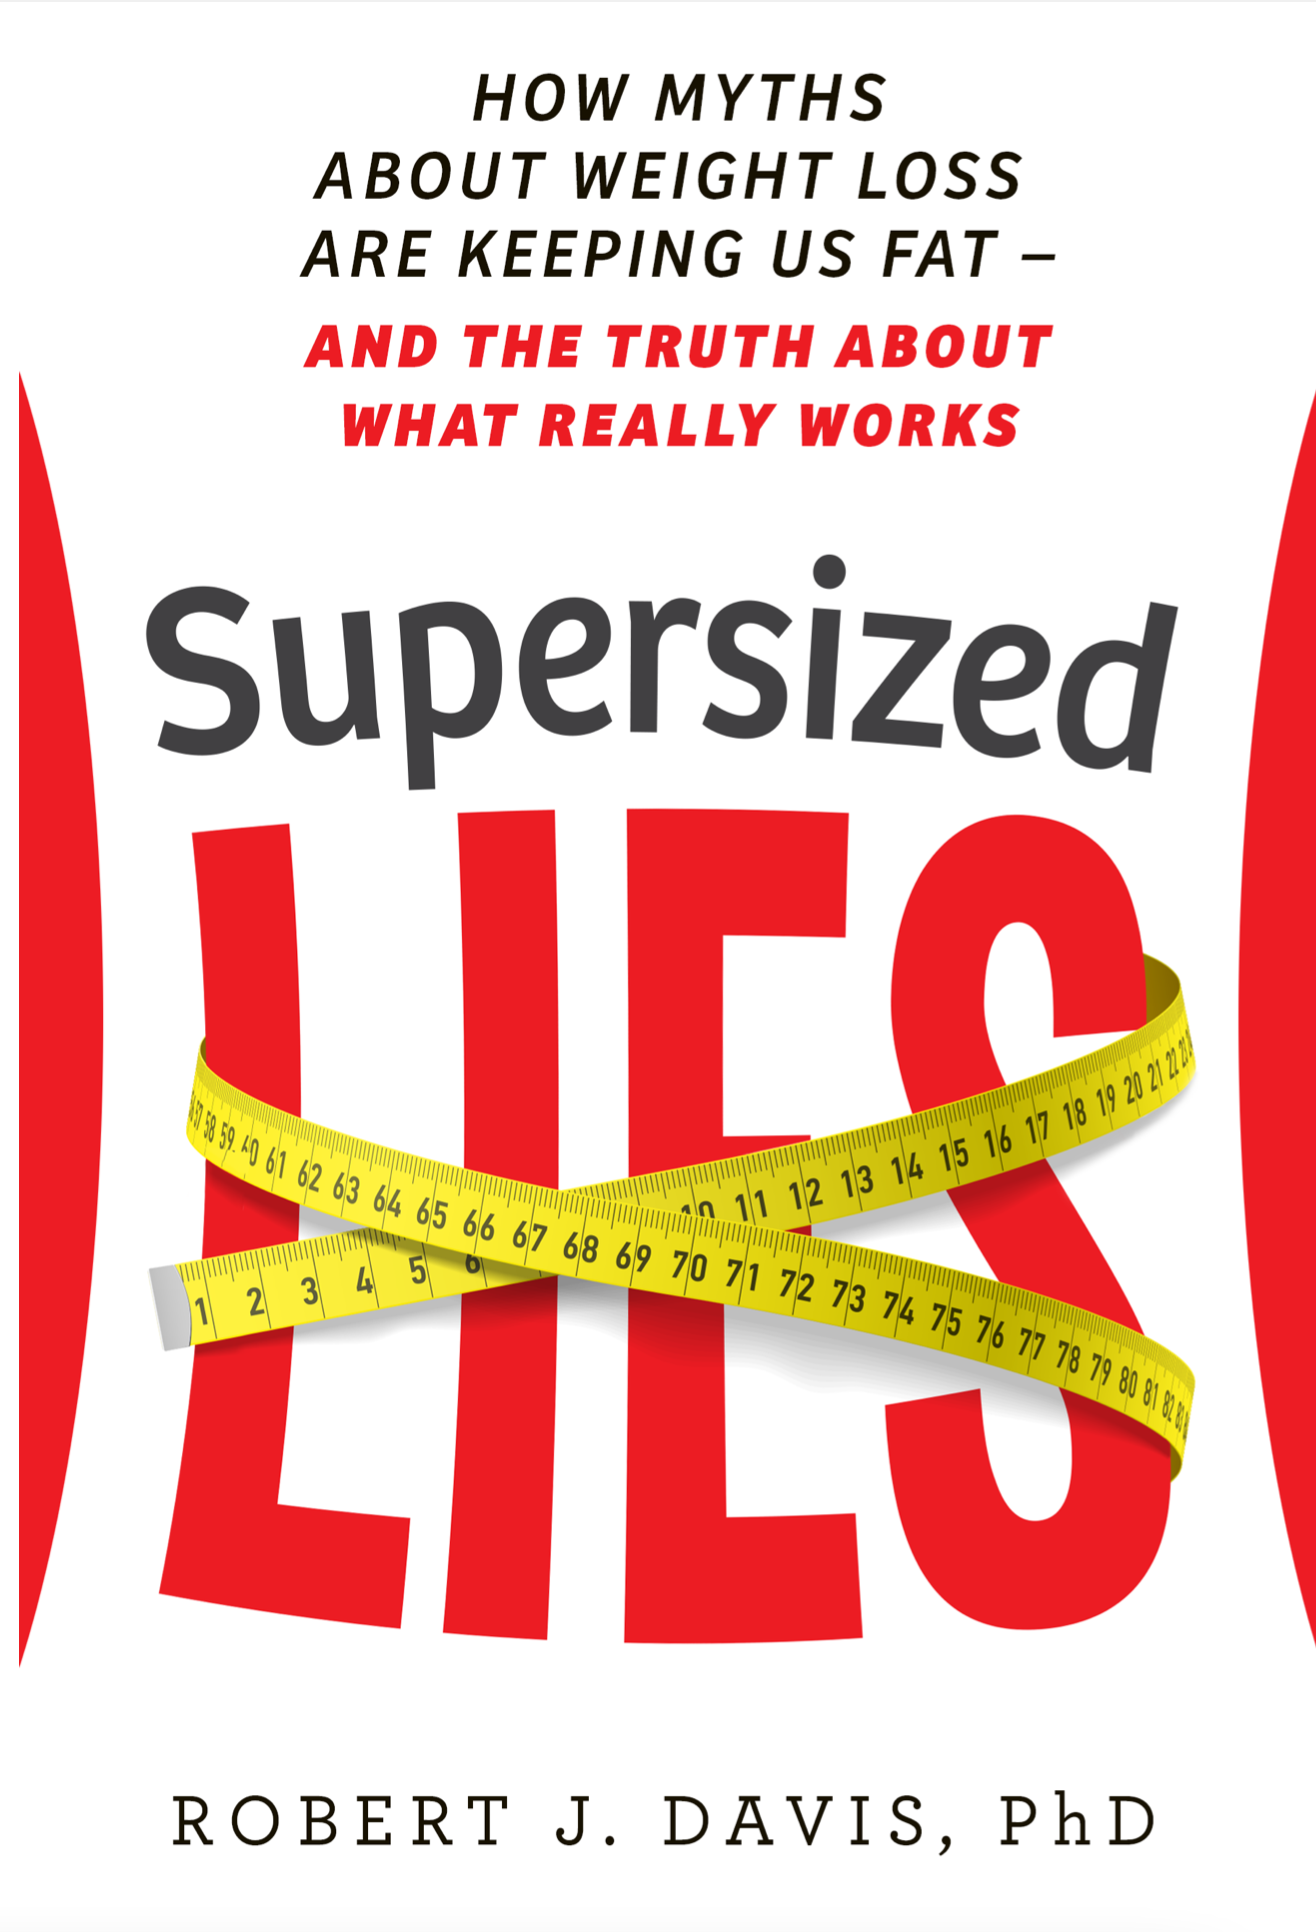 You are currently viewing Supersized Lies by Robert J. Davis, PhD -Book Review